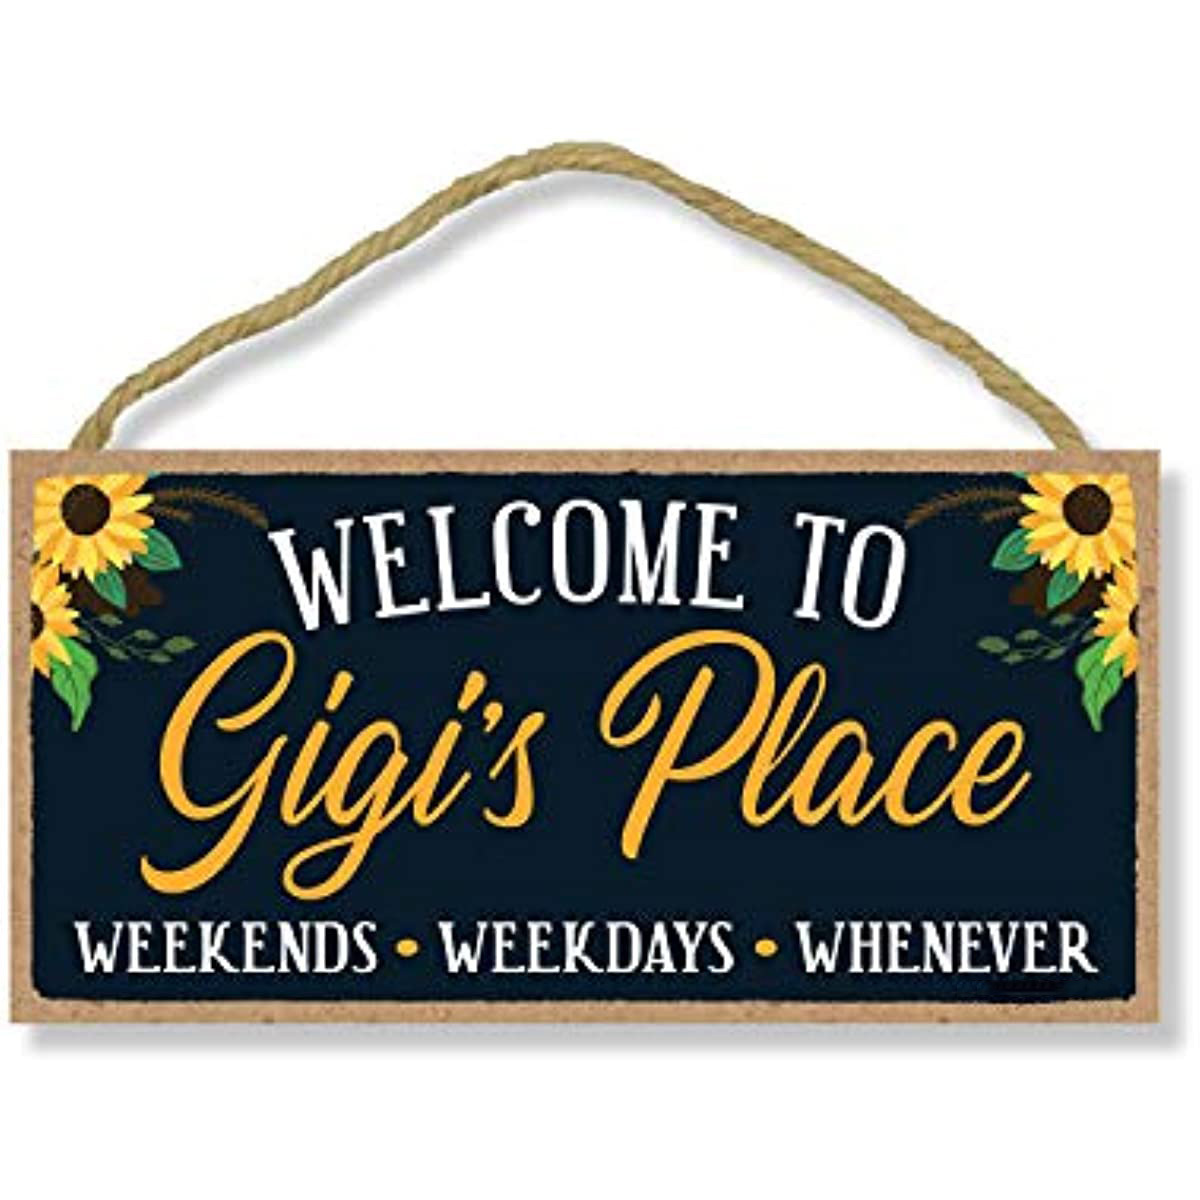 

1pc Welcome To Gigi's Place, Hanging Wooden Sign Home Decor For Grandma, Hanging Decorative Wall Sign Gift